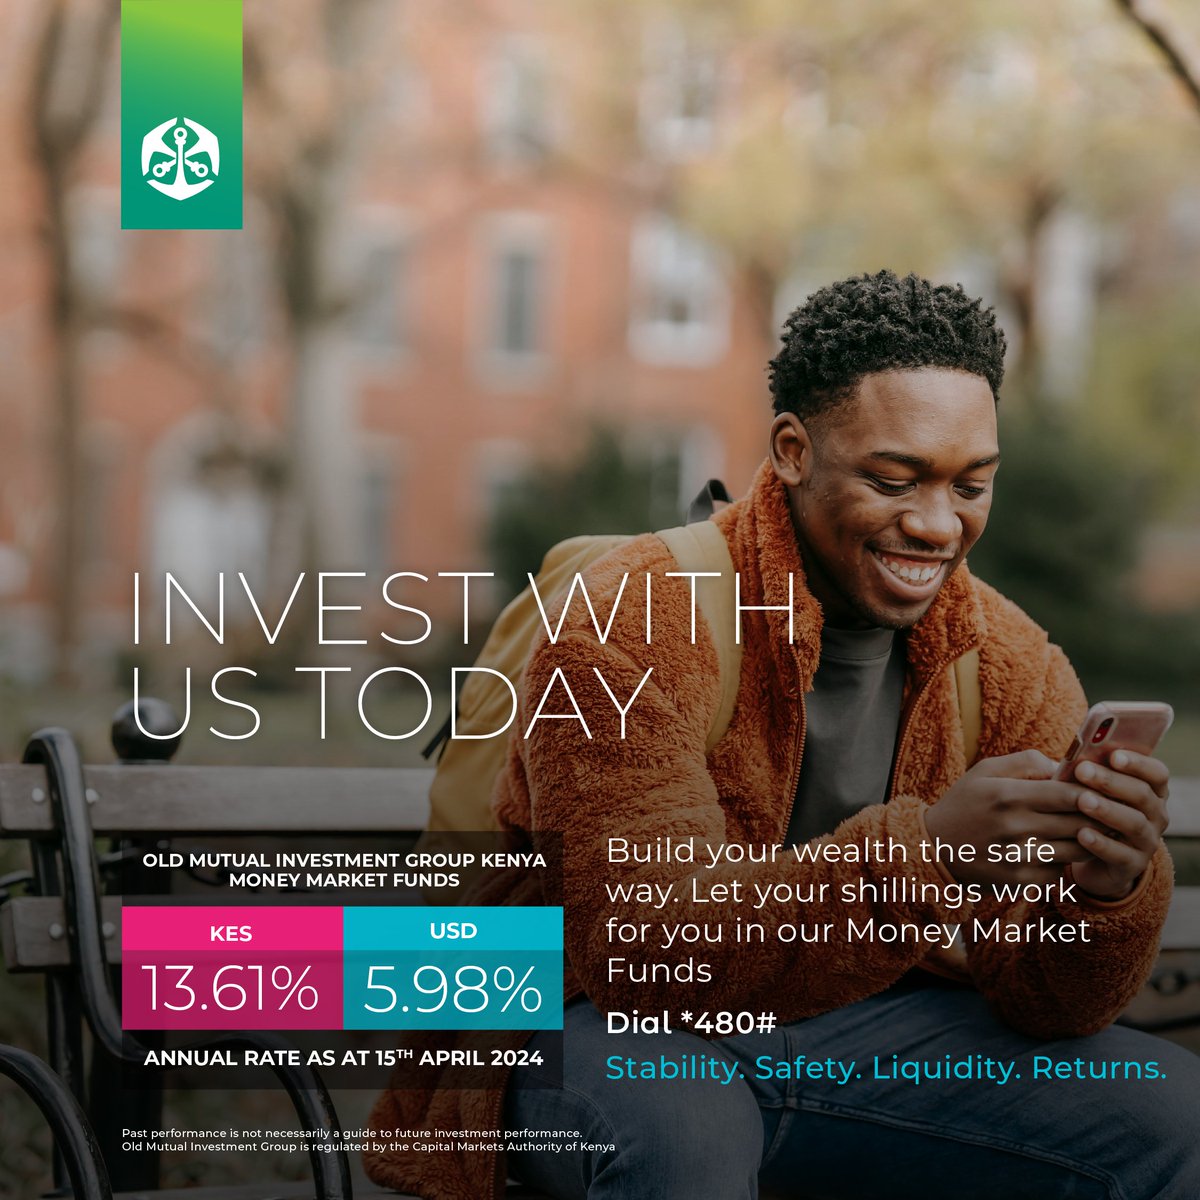 Choose safety and performance! Invest in our Money Market Funds for a winning combination of low risk and high returns. Invest through your phone by dialing *480# #InvestSmart #UnlockingPossibilities